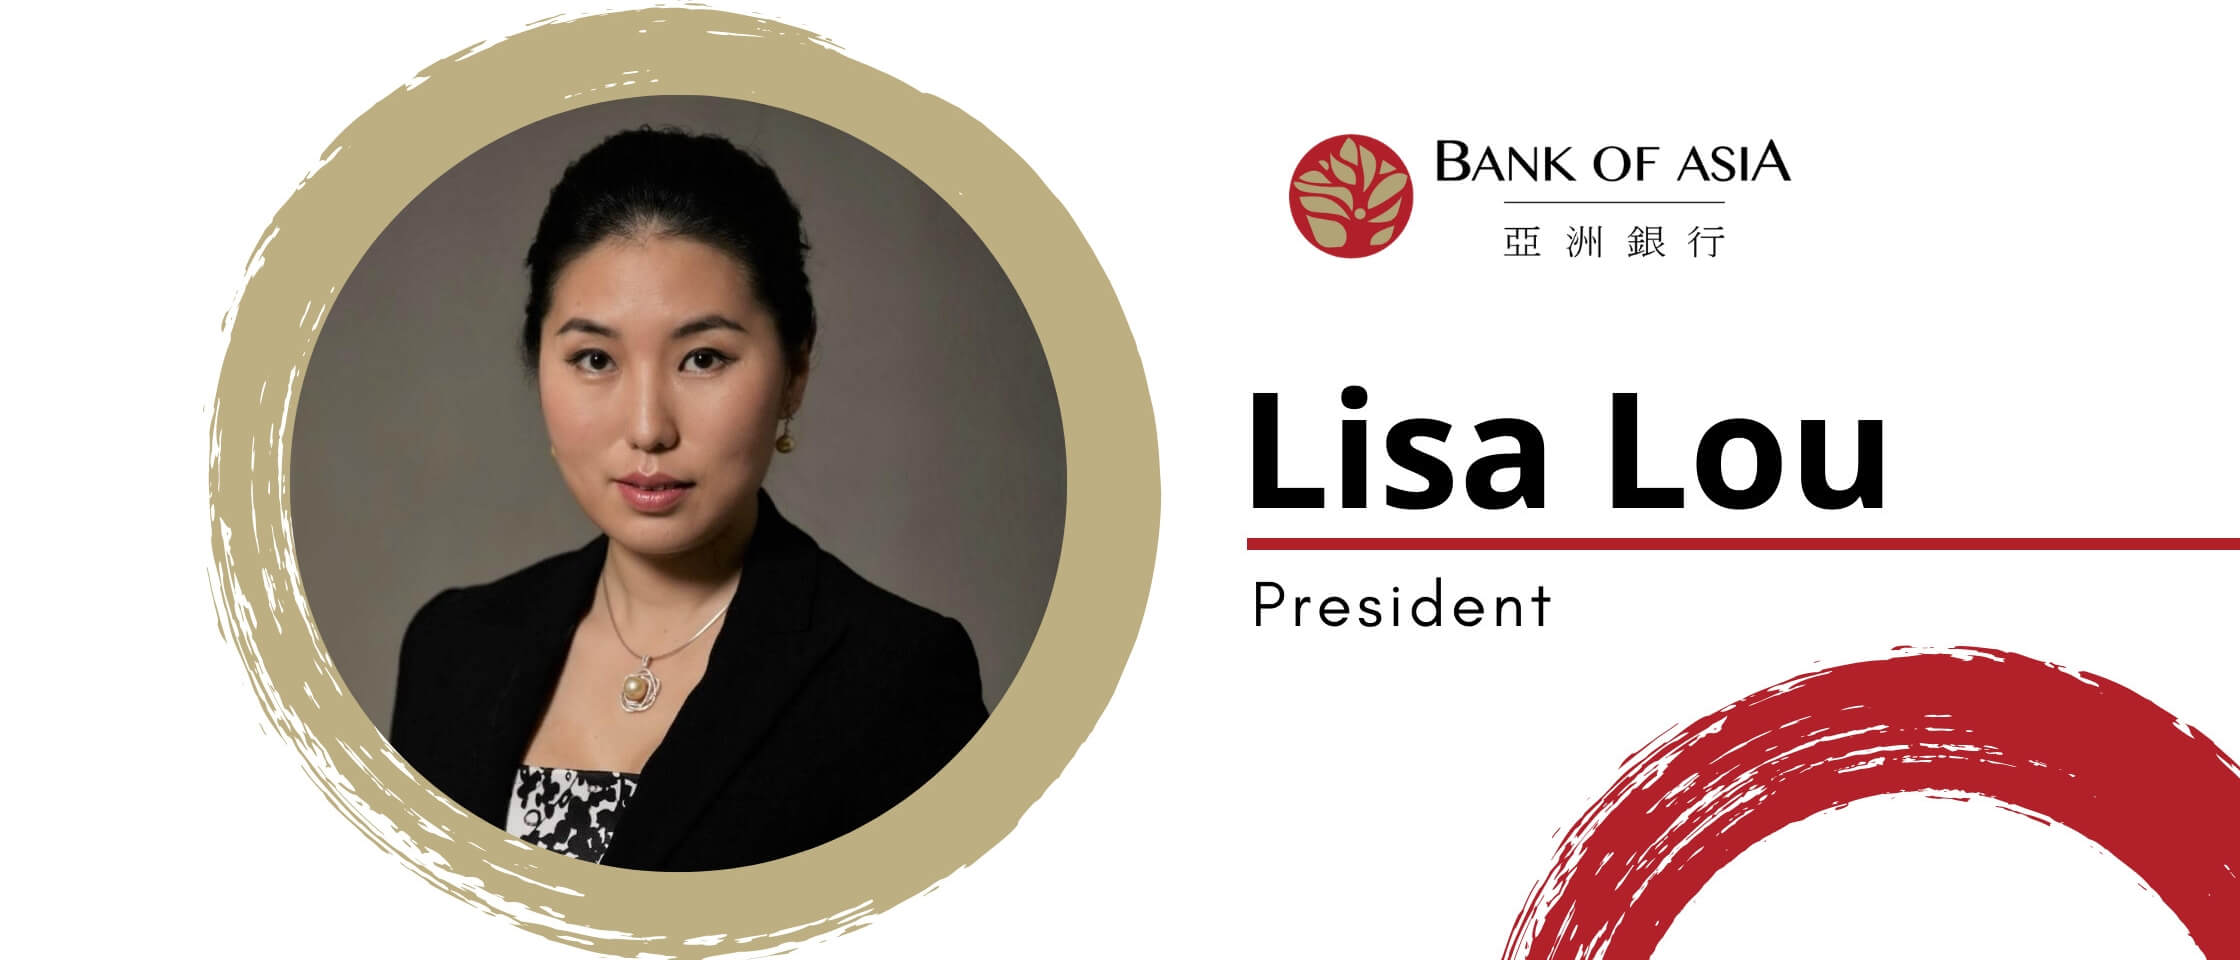 Bank of Asia appoints Lisa Lou as President